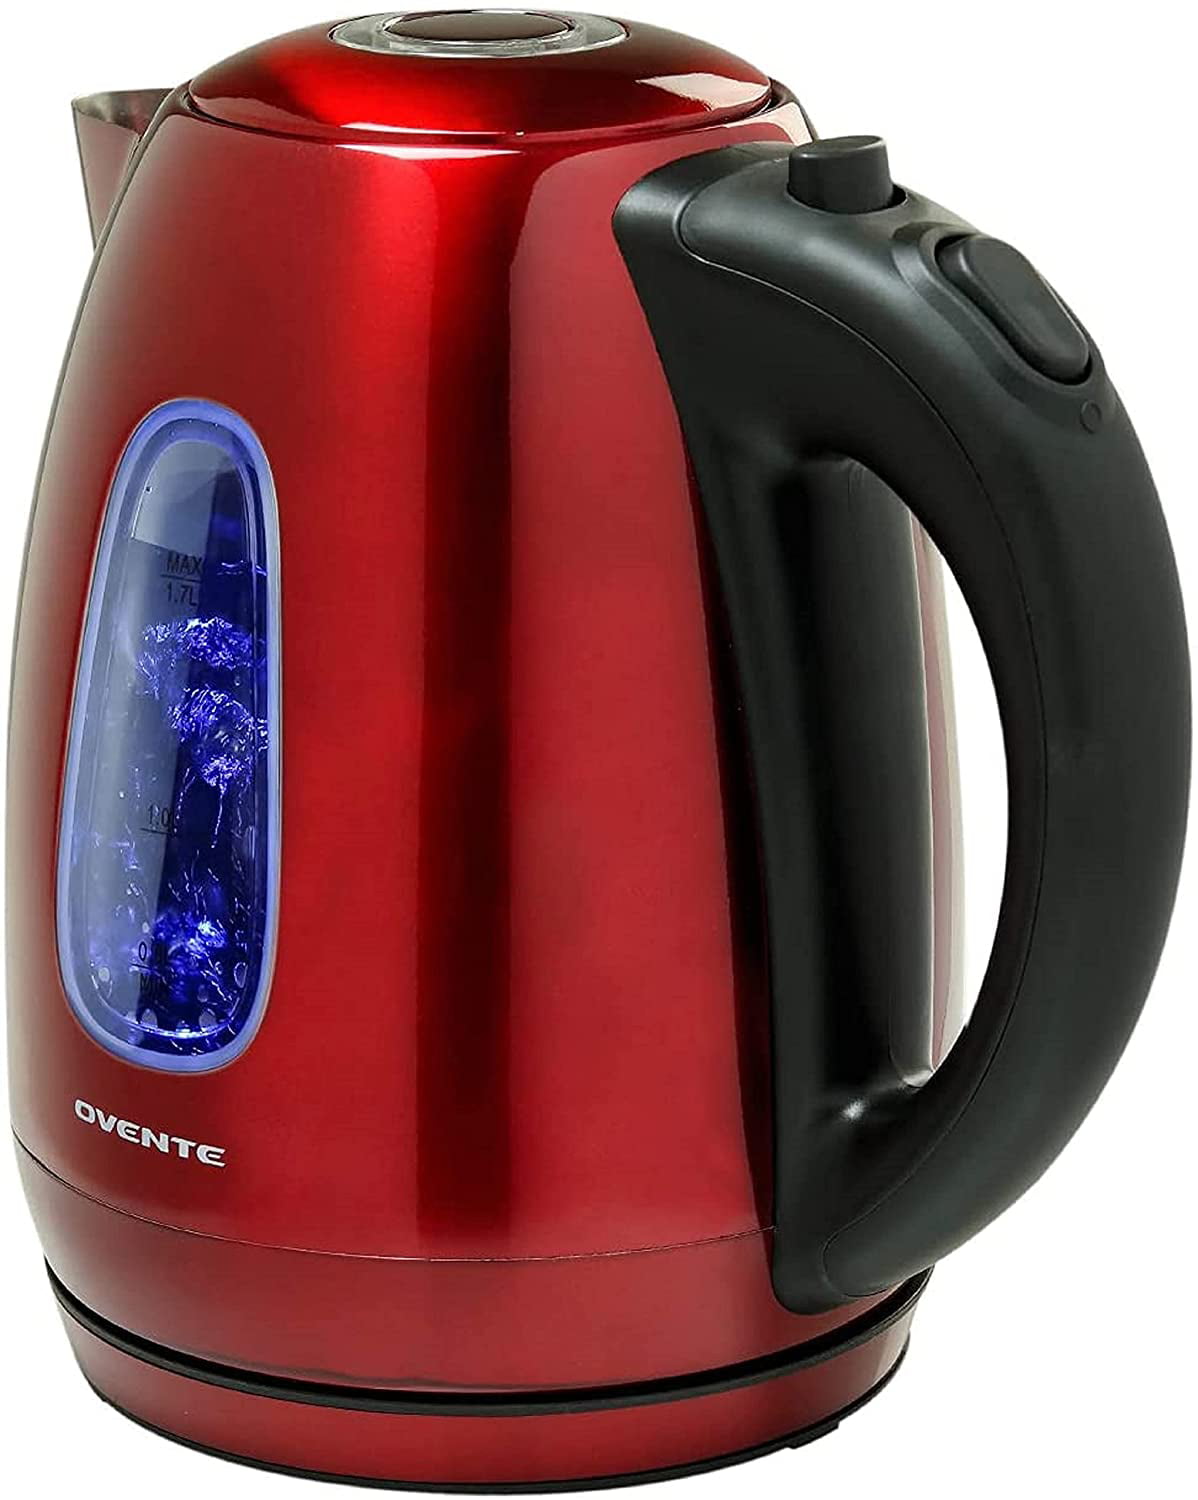 OVENTE Electric Tea Kettle Stainless Steel 1.2 Liter Portable Instant Hot  Water Boiler Heater 1100W Power Fast Boiling with Cordless Body and